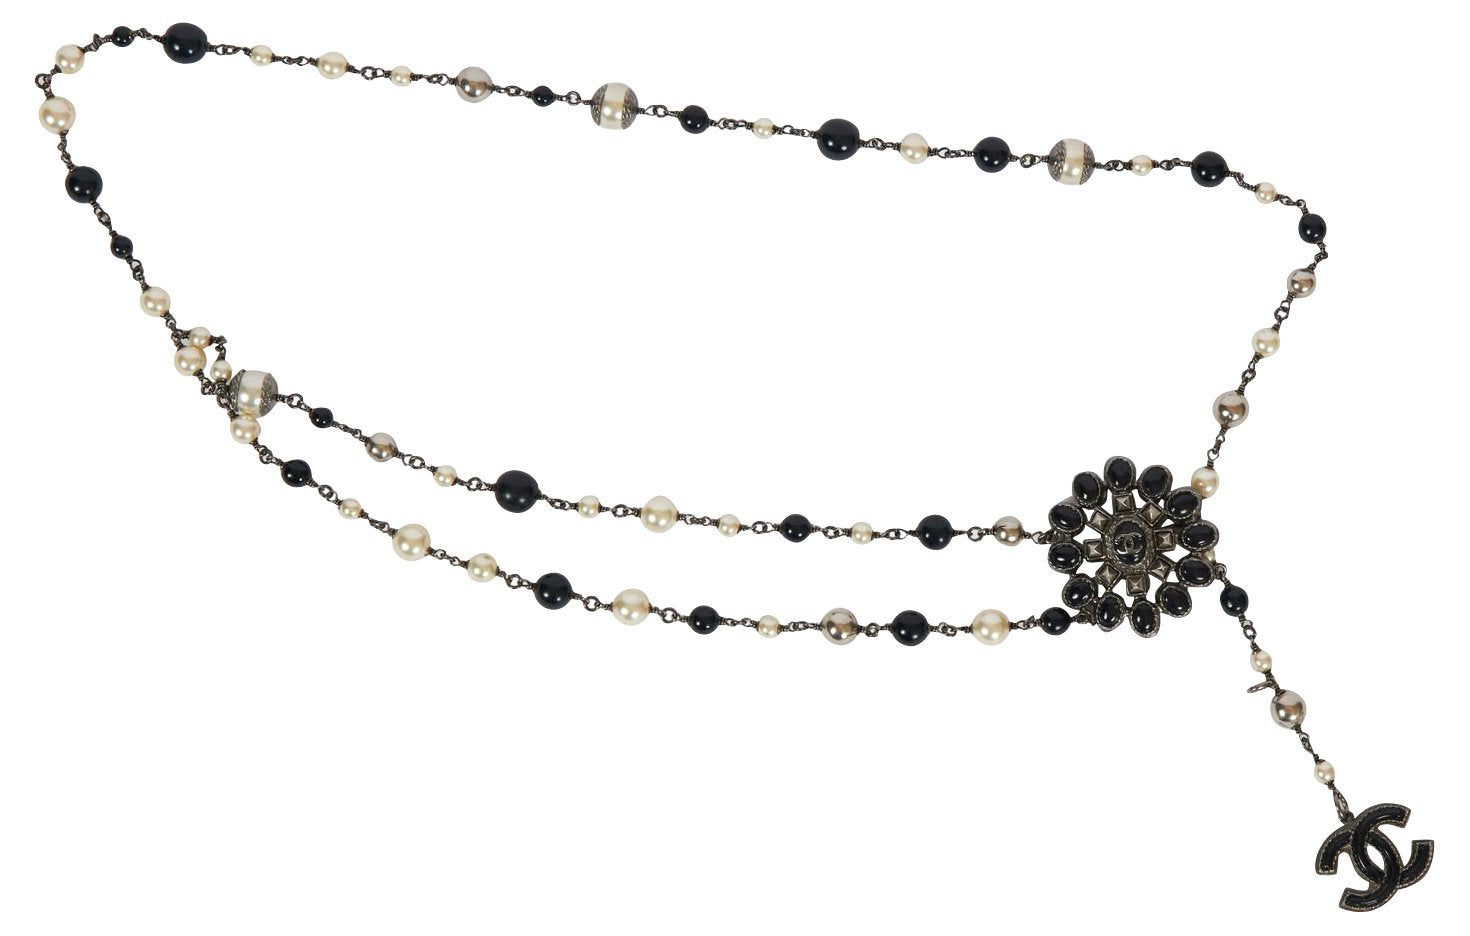 Chanel black pearl necklace  Black pearl necklace, Chanel